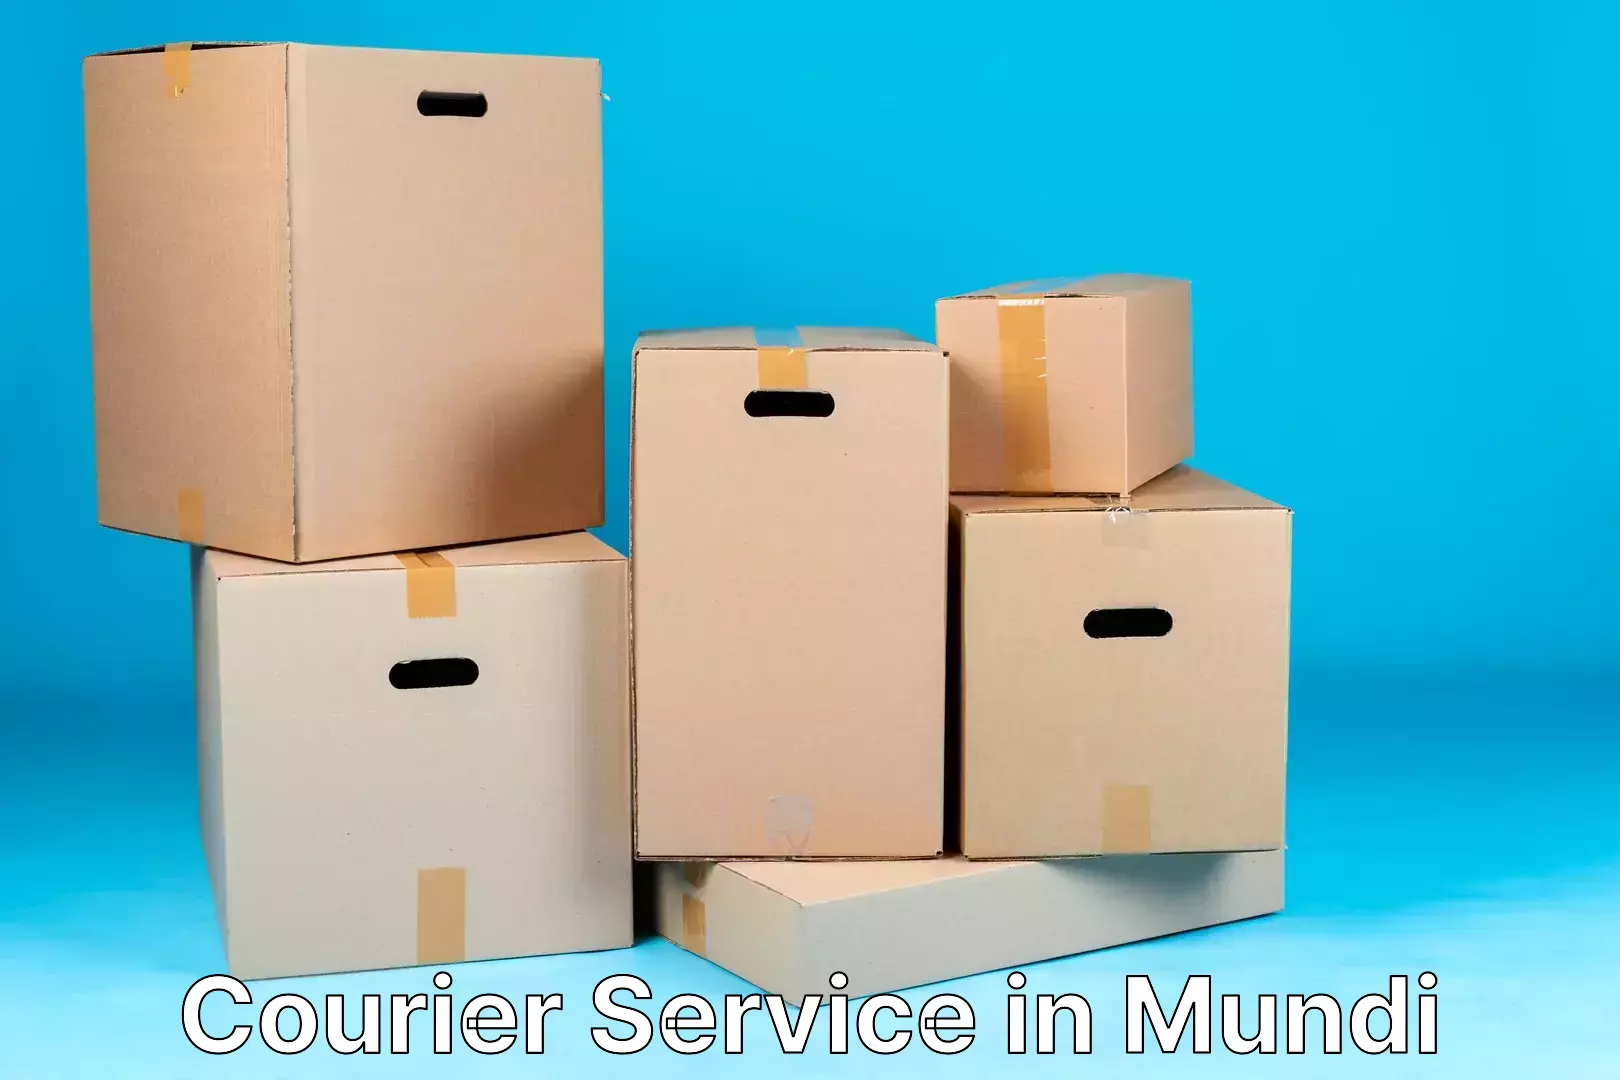 State-of-the-art courier technology in Mundi